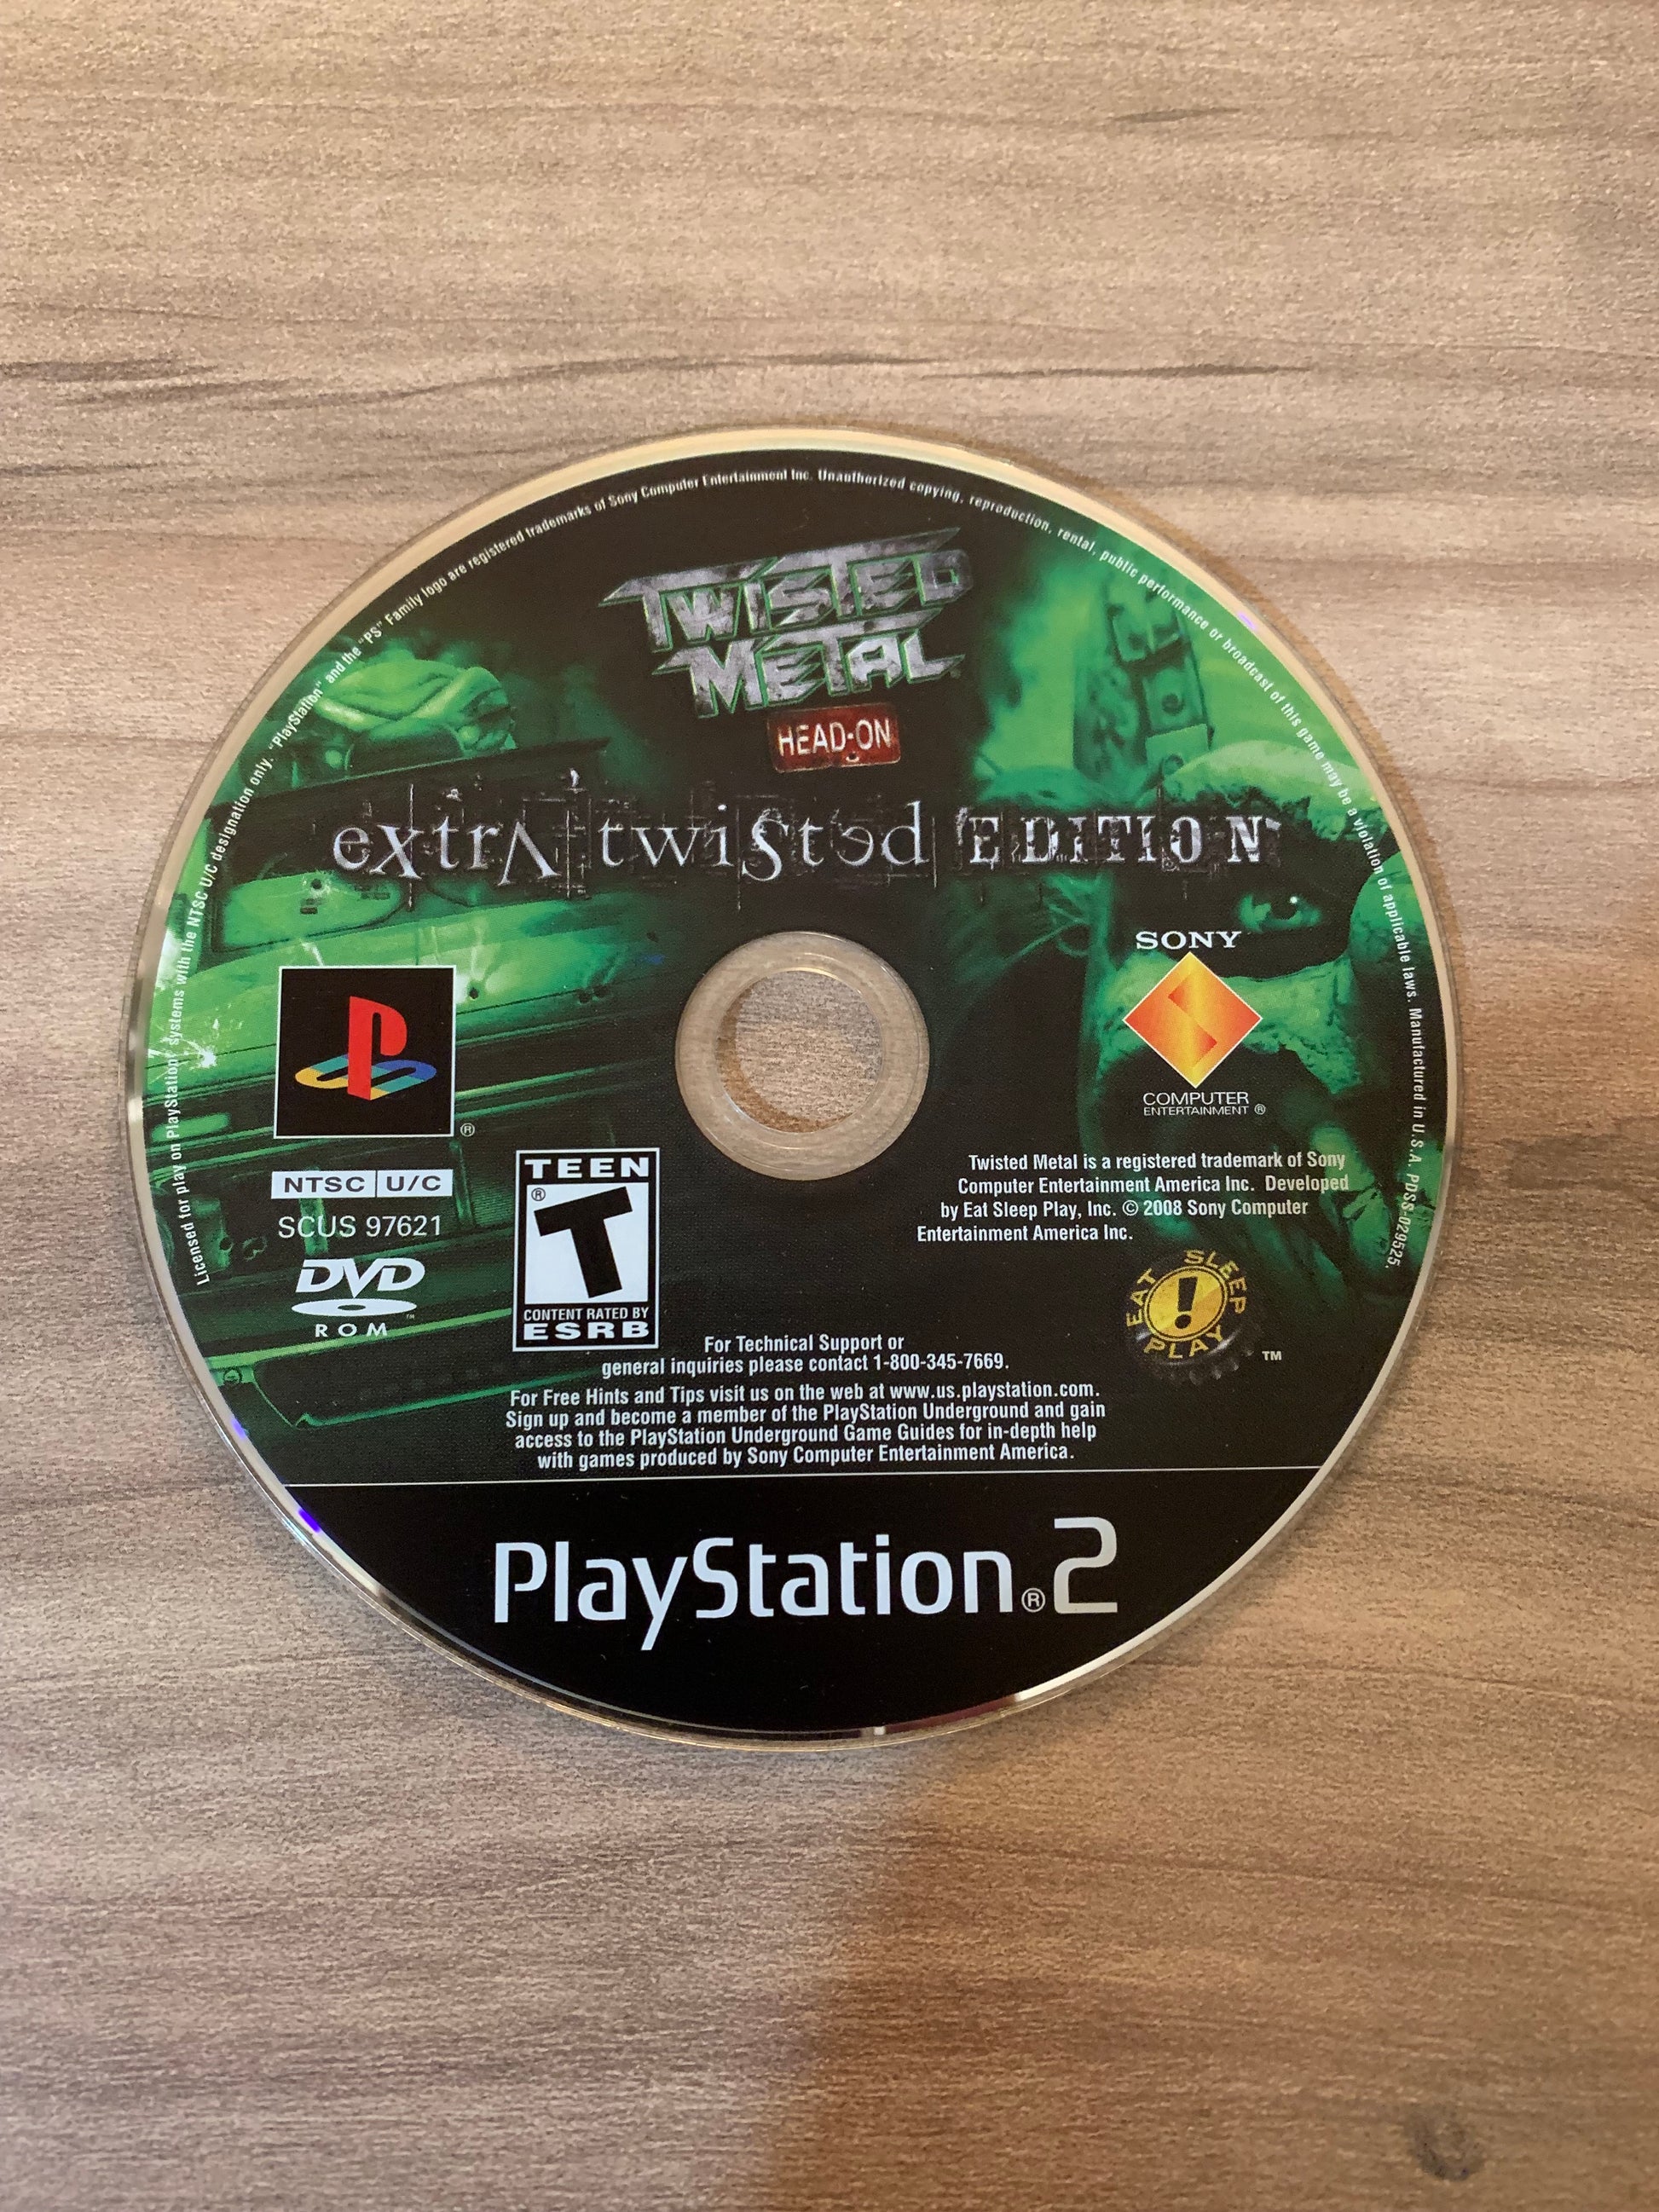 PiXEL-RETRO.COM : SONY PLAYSTATION 2 (PS2) GAME NTSC TWISTED METAL HEAD-ON EXTRA TWISTED EDITION